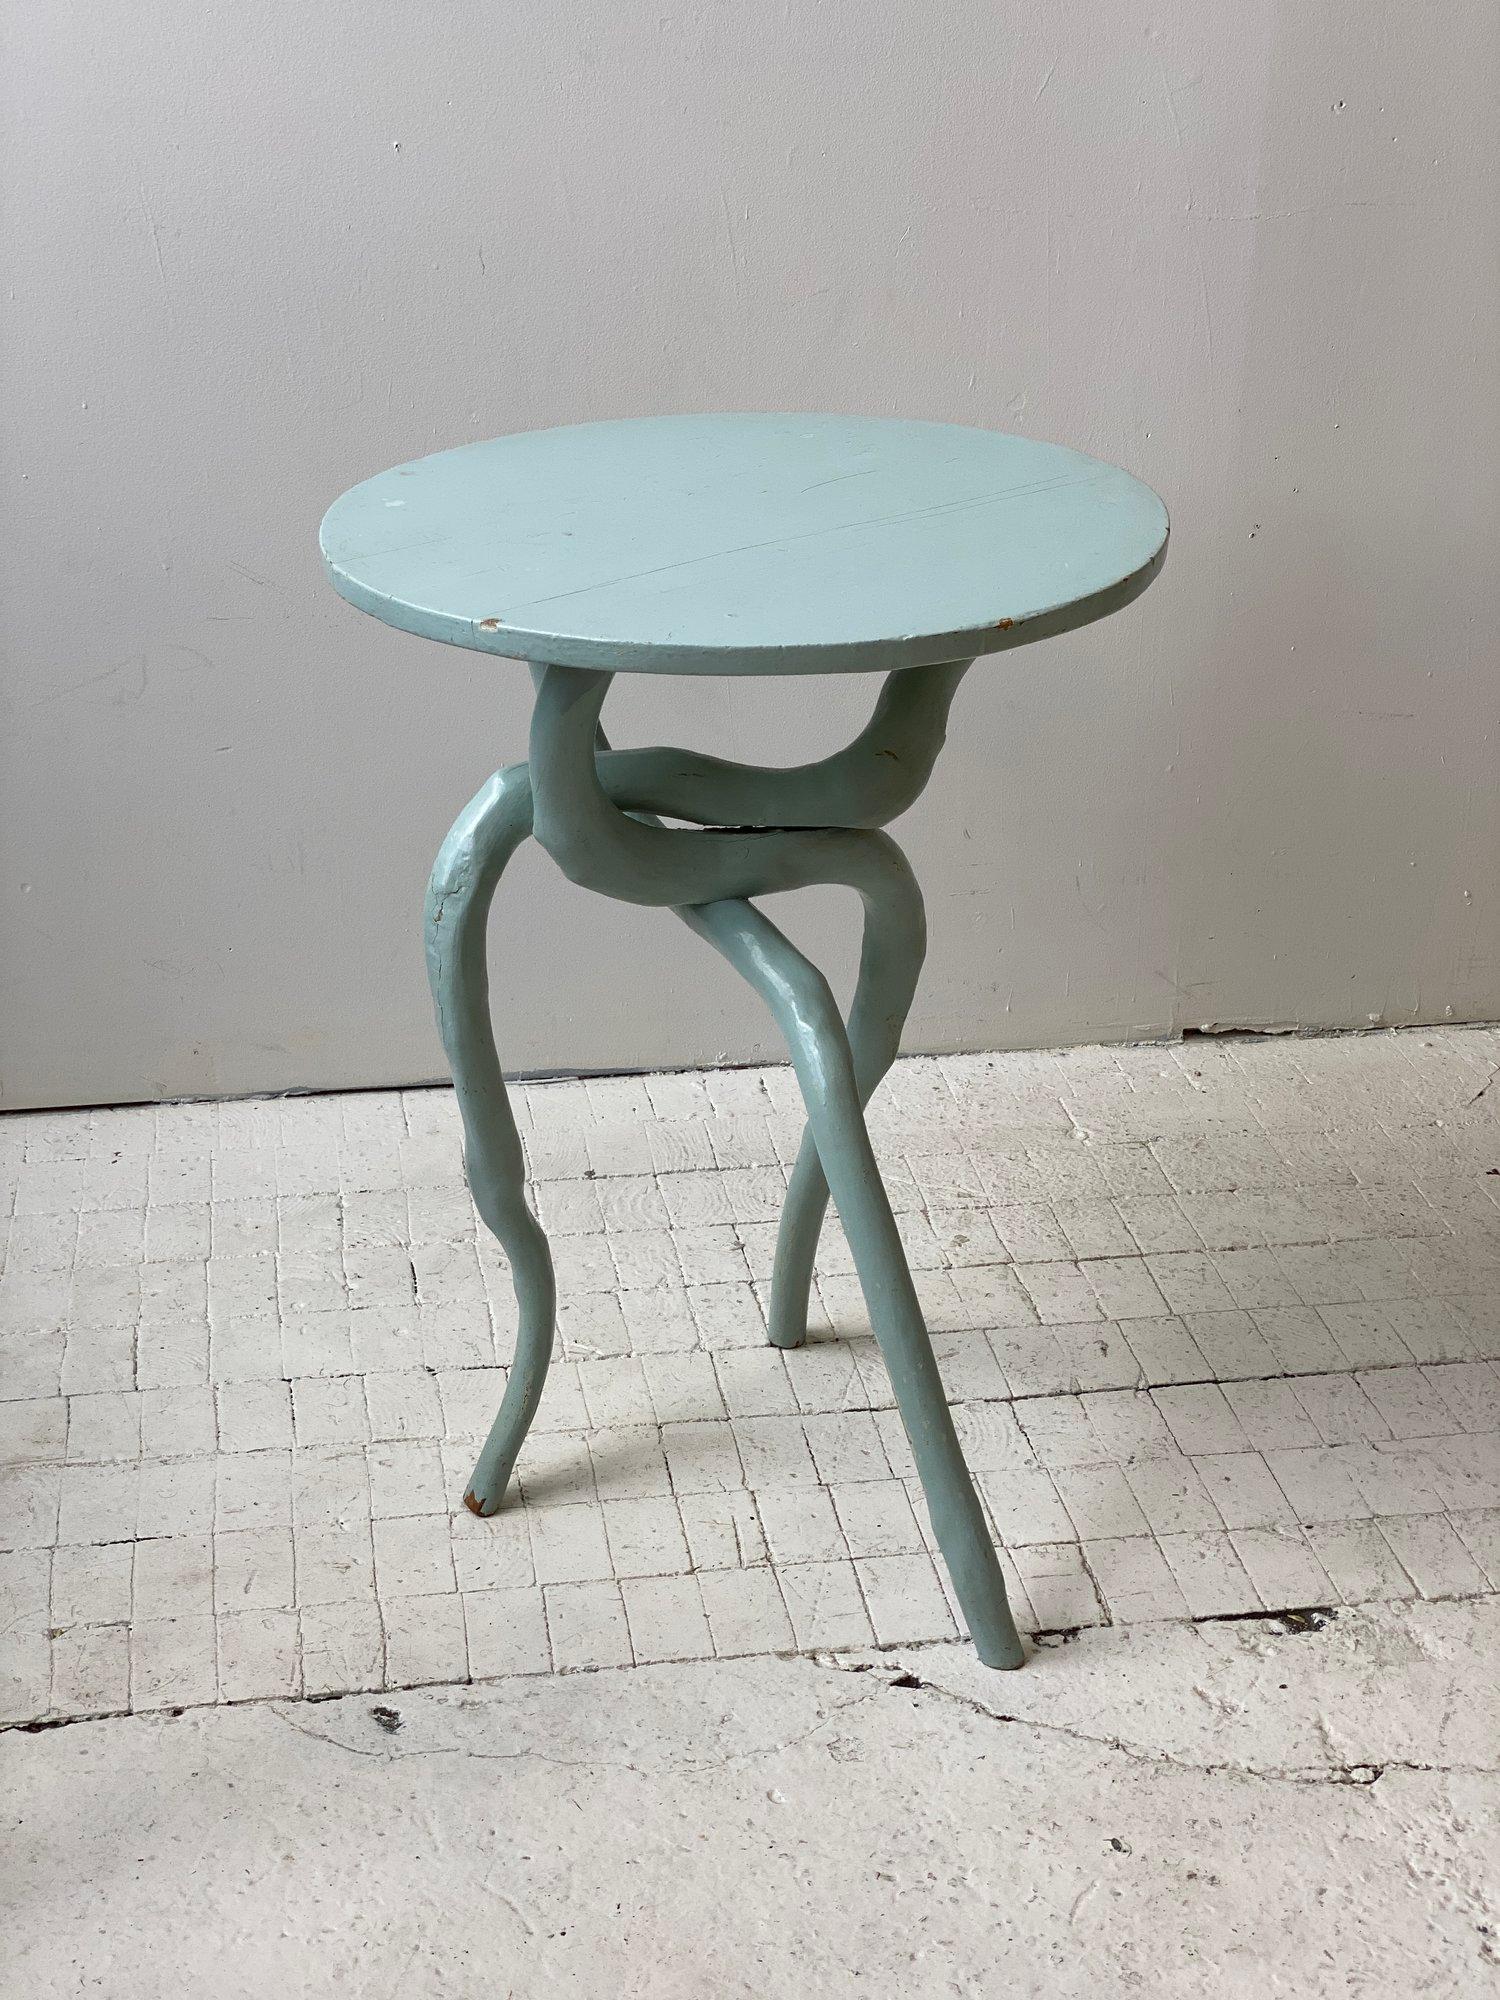 Rare Antique Sculptural Folk Art Powder Blue Painted Twig Table, Circa Late 19th In Good Condition For Sale In Long Island City, NY